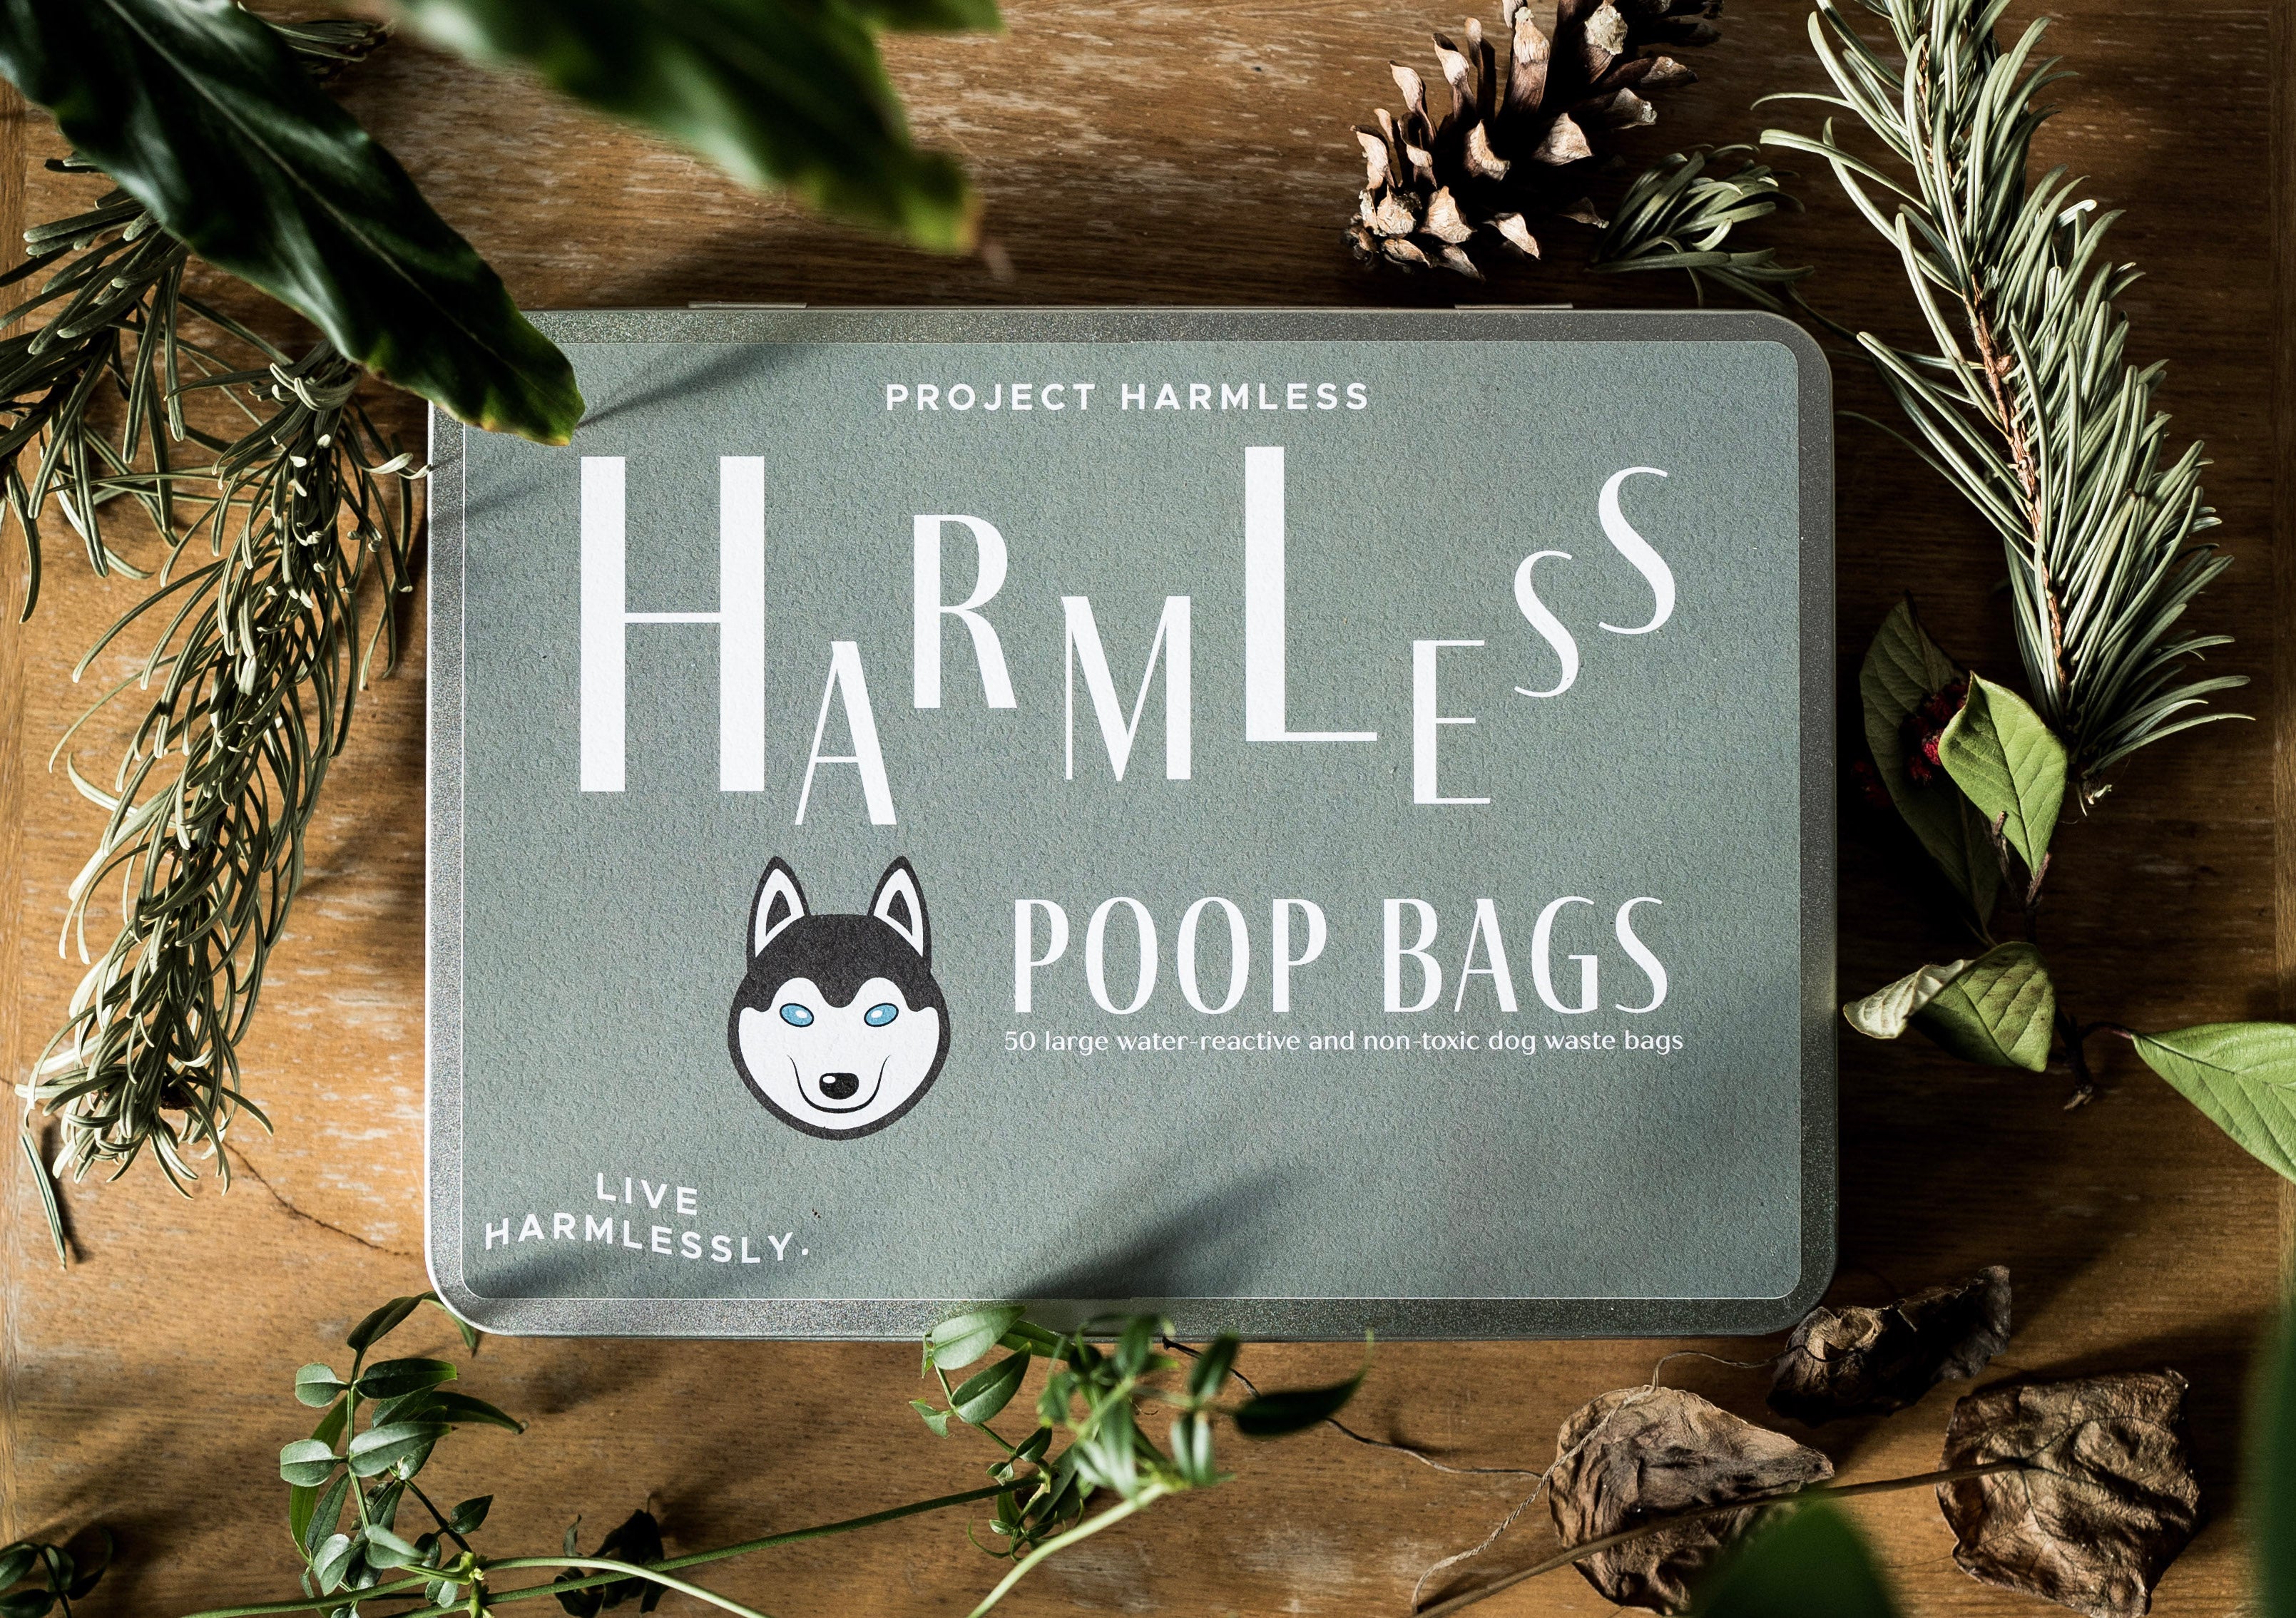 Harmless Poop Bag by Project Harmless